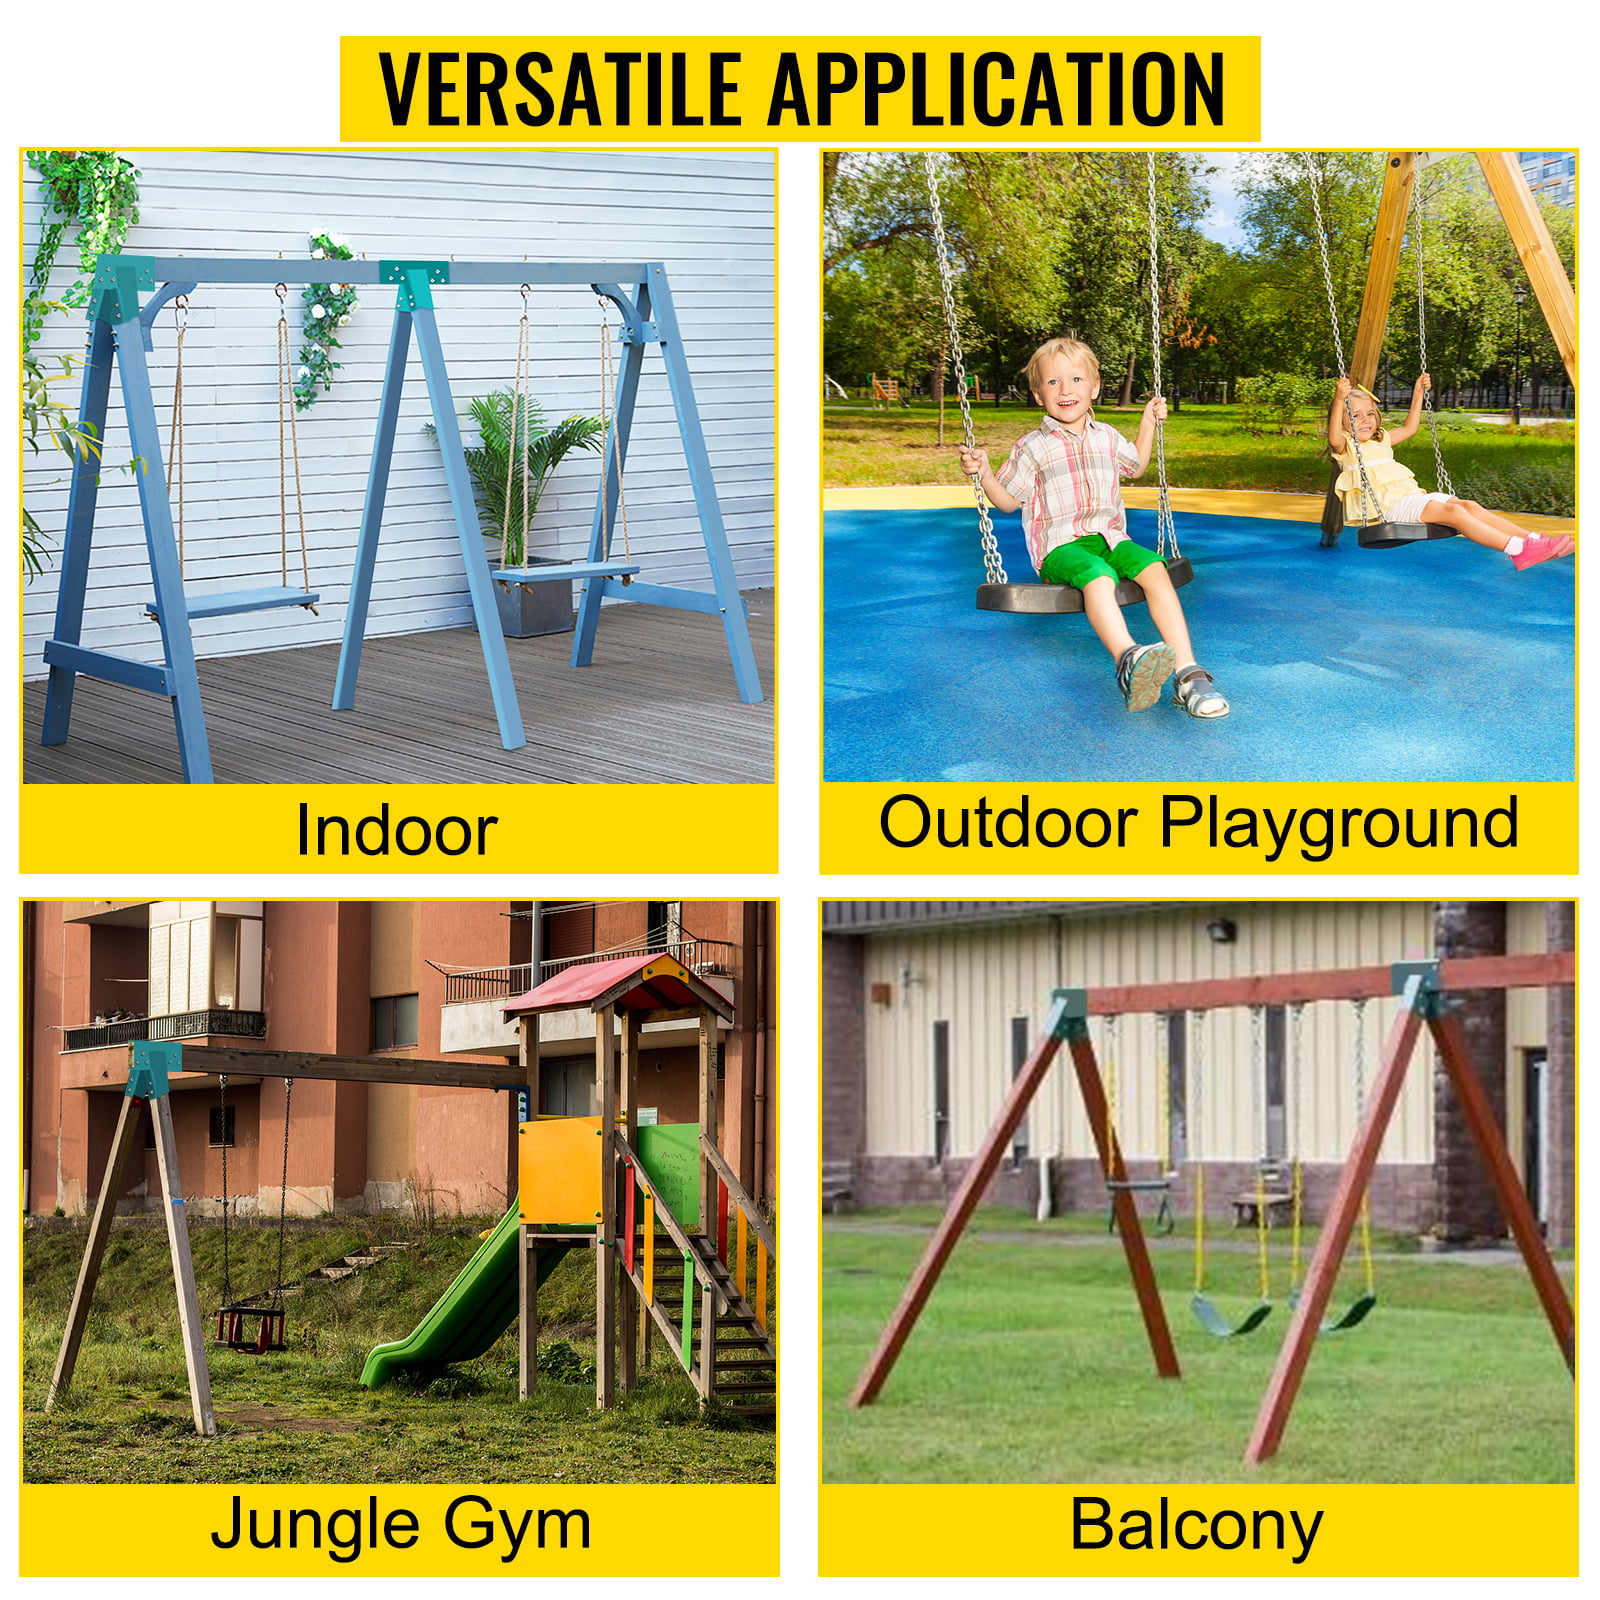 Children & Toddler Swing Set Accessory Parts for The Playground Park or Backyard Or Patio 4x6, 2 Brackets, Includes All Parts SAFARI SWINGS Outdoor Metal A Frame Swingset Bracket Hardware Baby 